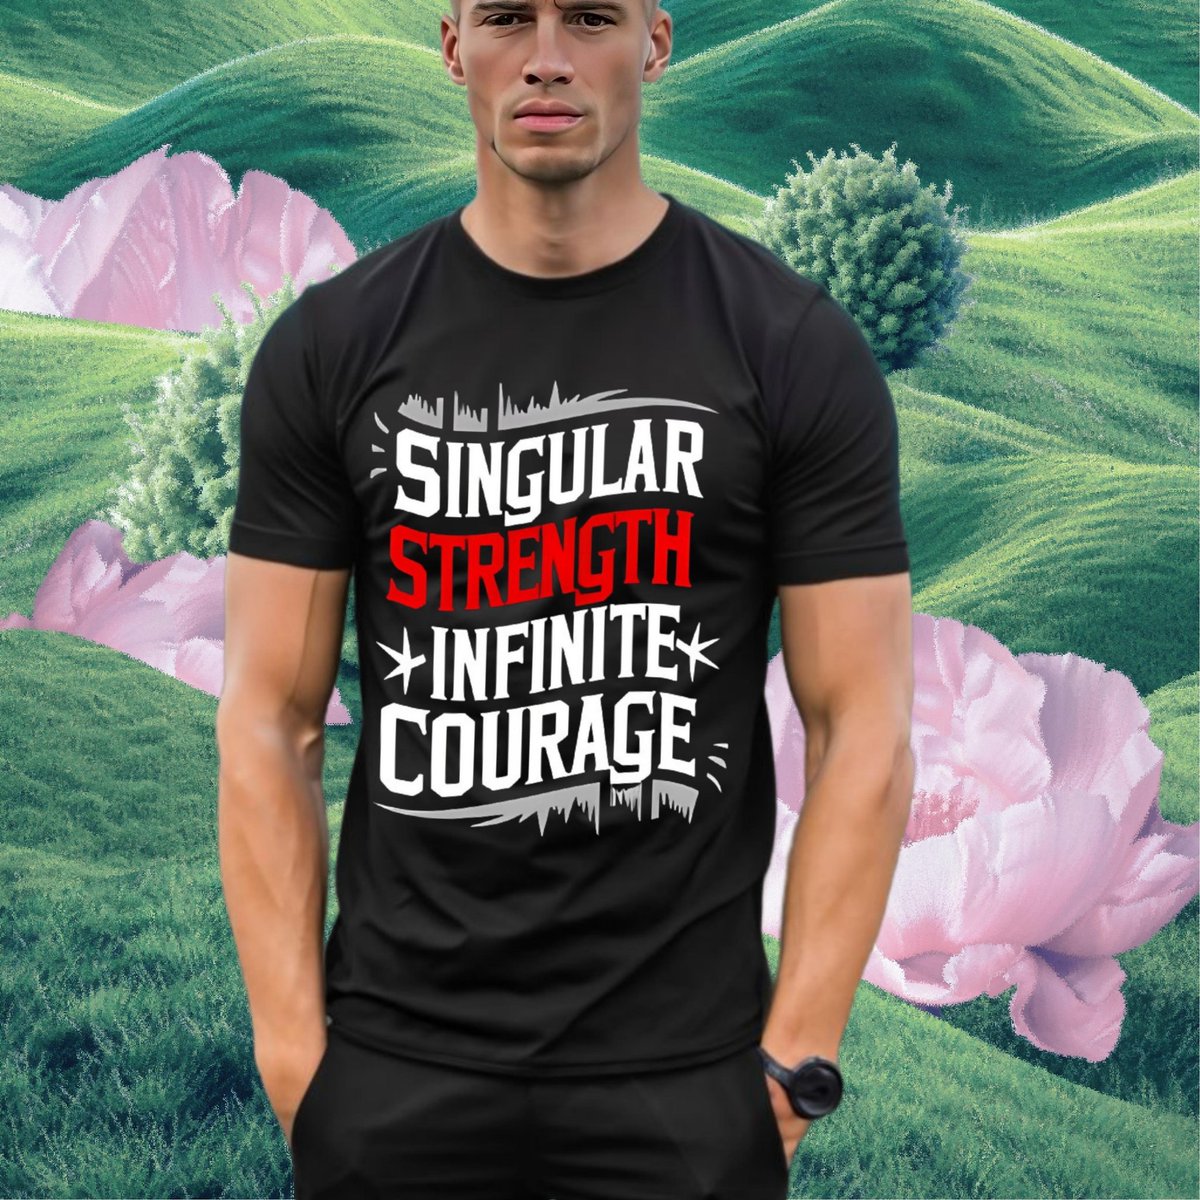 Unveiling our newest creation: 'Singular Strength, Infinite Courage' 💫 Embrace this symbol of empowerment and ignite the spark of resilience within. Grab yours today and spread the inspiration! #EmpowerYourself #WearYourStrength #InspireCourage #EmpoweringDesign #InnerResilience